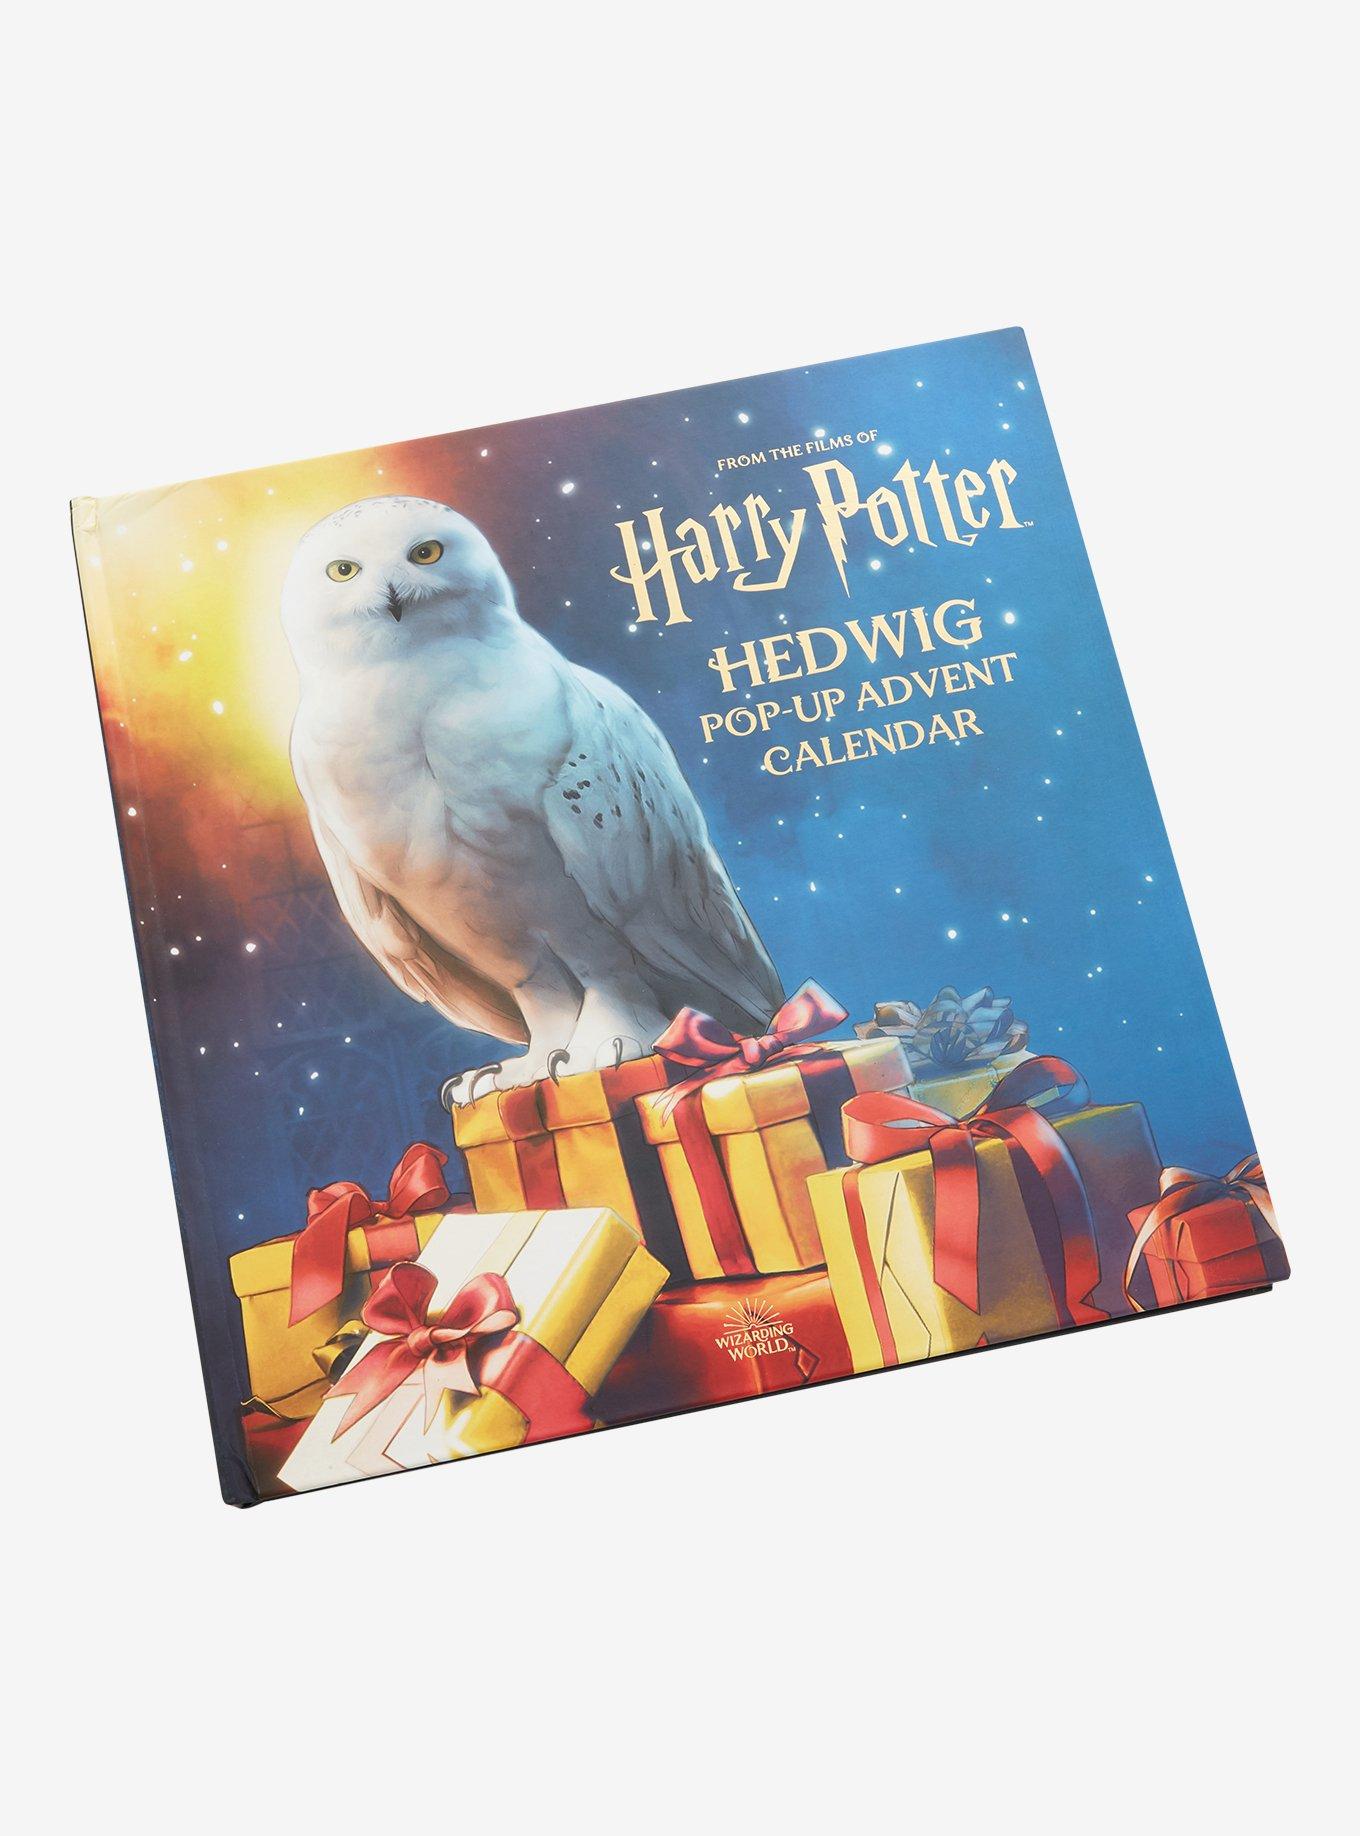 Harry Potter Charms Hedwig Photo Album